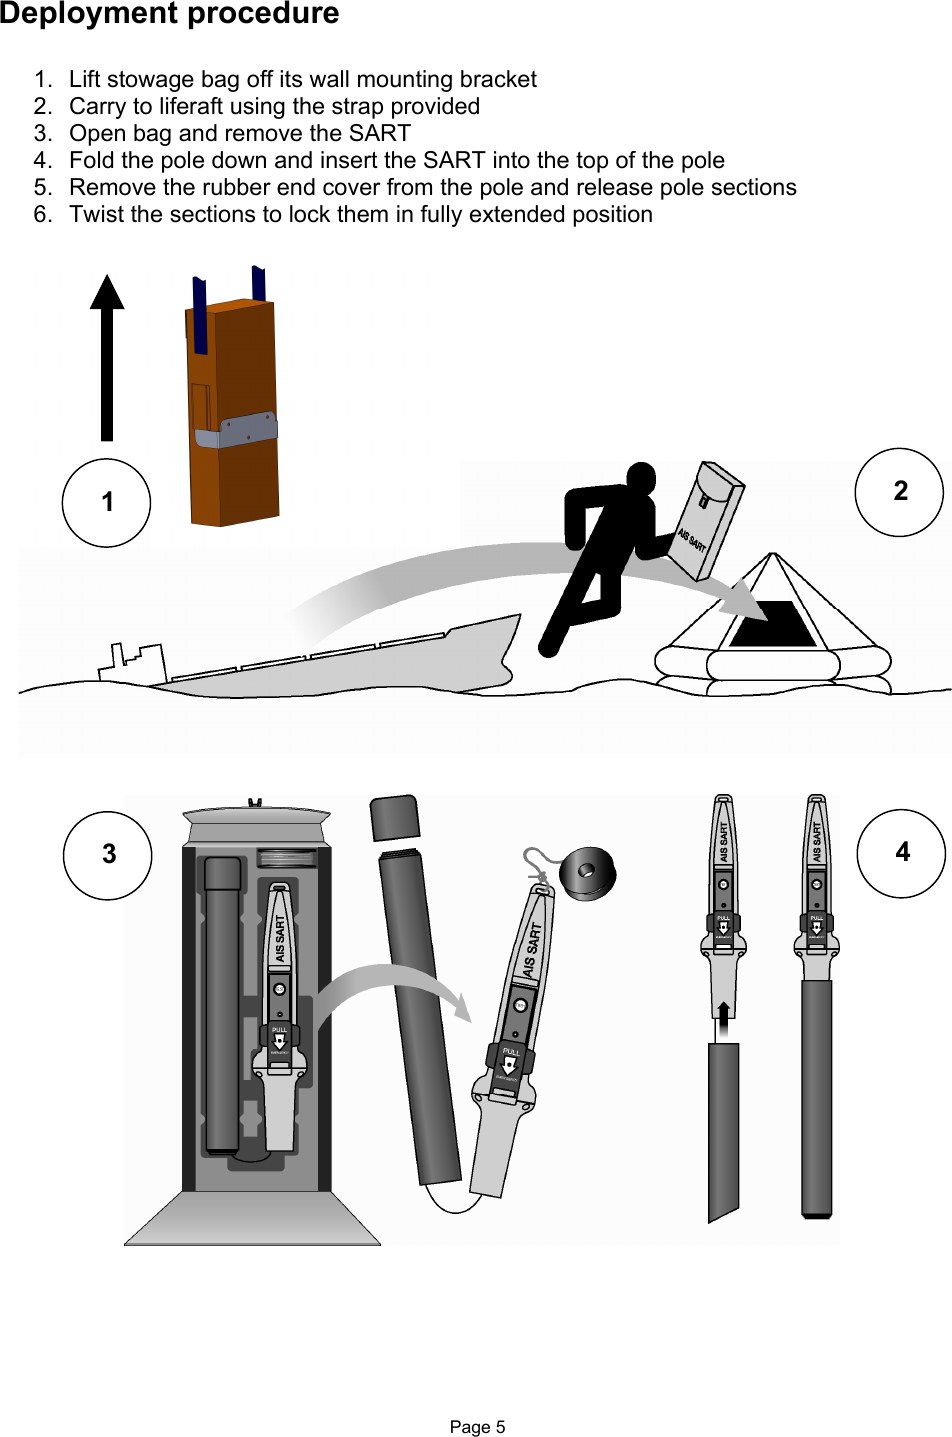  Page 5 Deployment procedure  1.  Lift stowage bag off its wall mounting bracket 2.  Carry to liferaft using the strap provided 3.  Open bag and remove the SART 4.  Fold the pole down and insert the SART into the top of the pole 5.  Remove the rubber end cover from the pole and release pole sections 6.  Twist the sections to lock them in fully extended position                                       2 1 4 3 